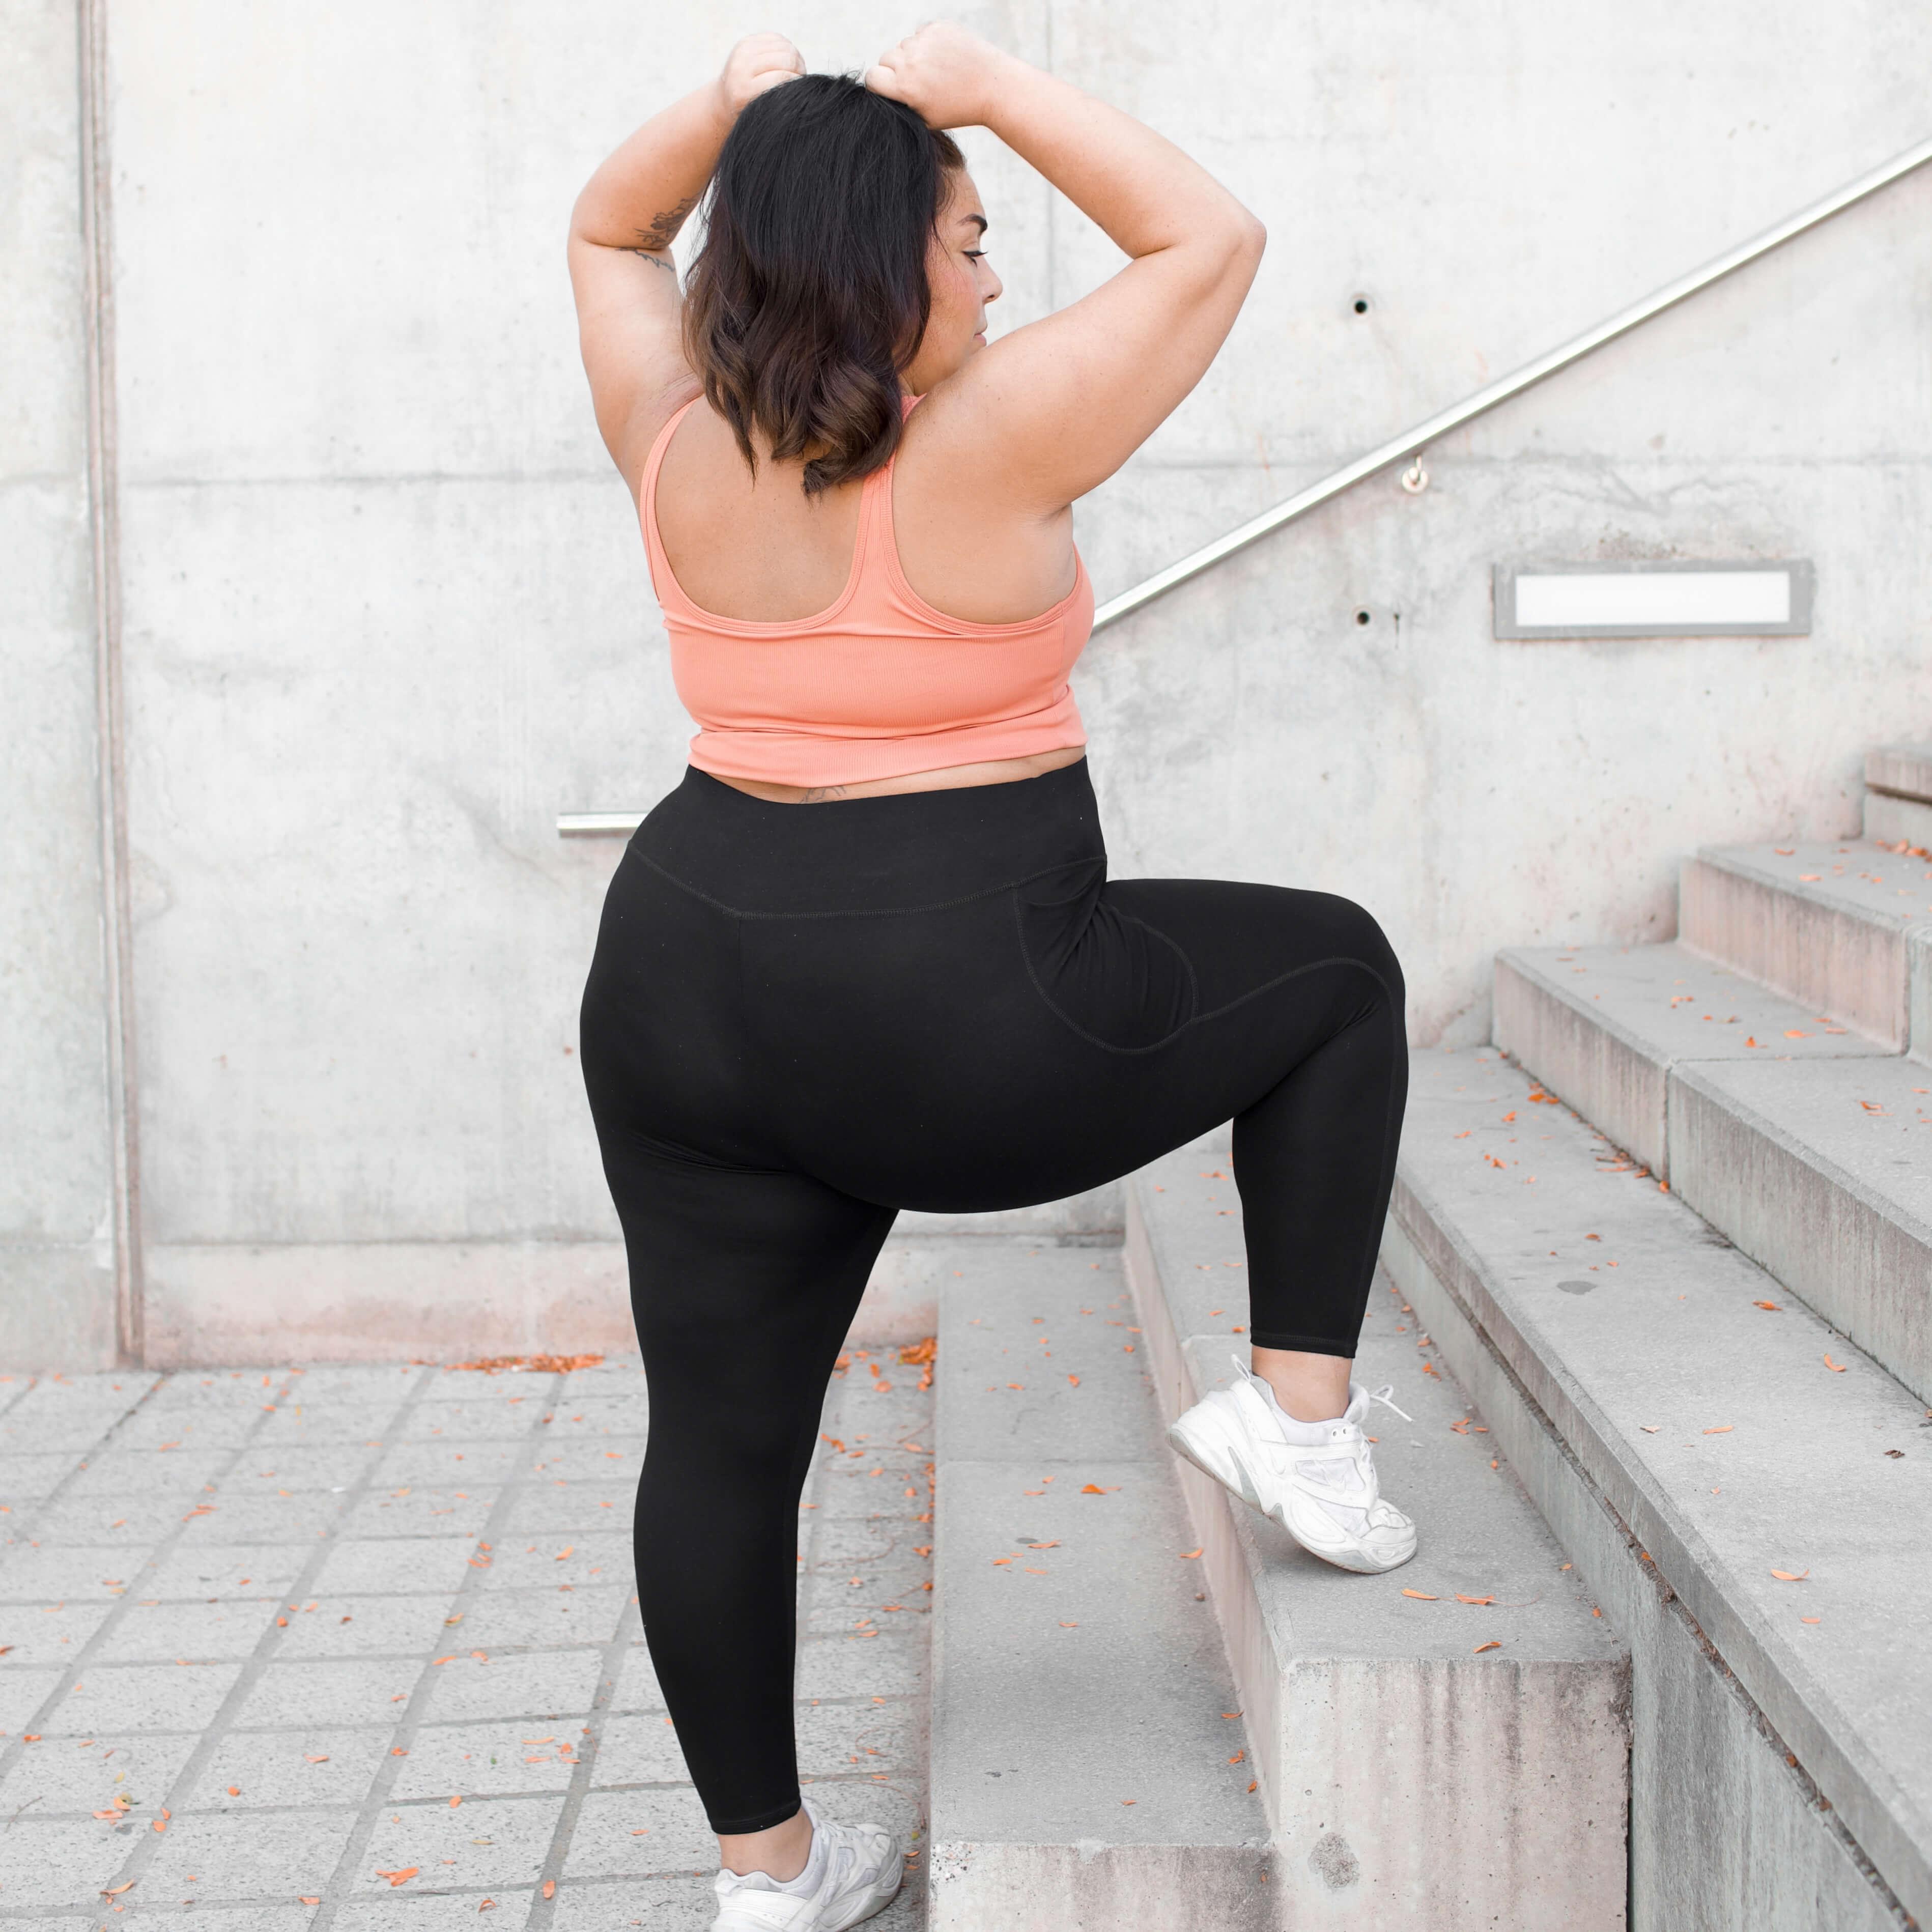 How to Know If Gym Leggings Are Squat Proof